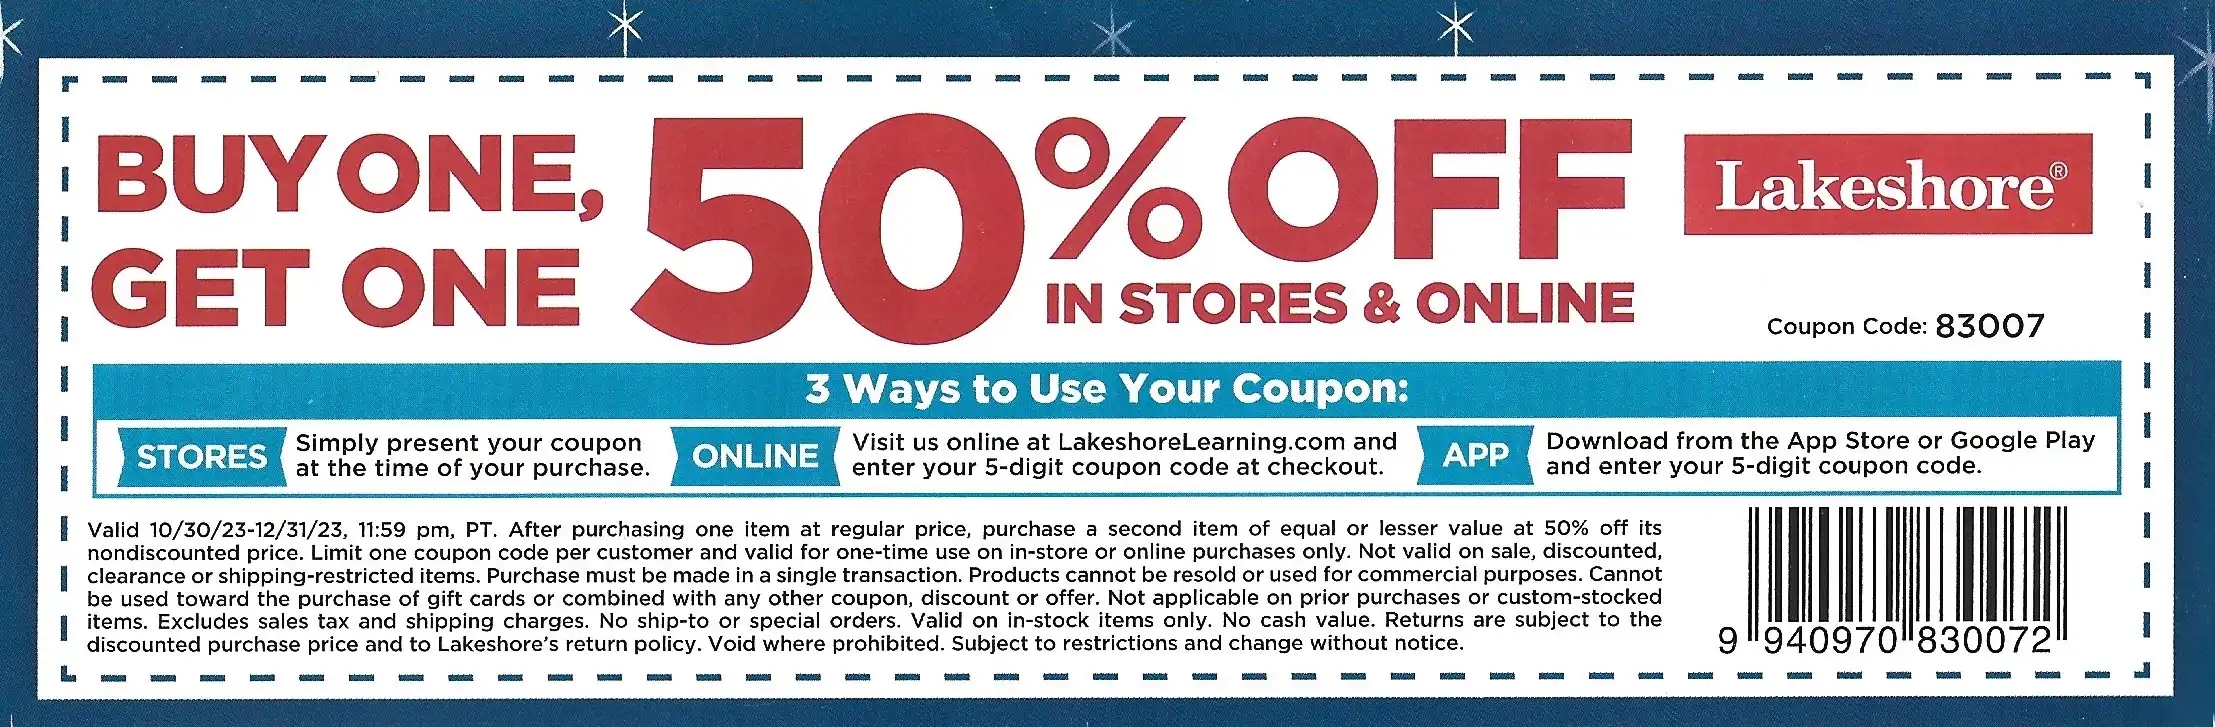 Lakeshore: Buy One Get One 50% Off In Stores & Online - Expires 12/31/2023